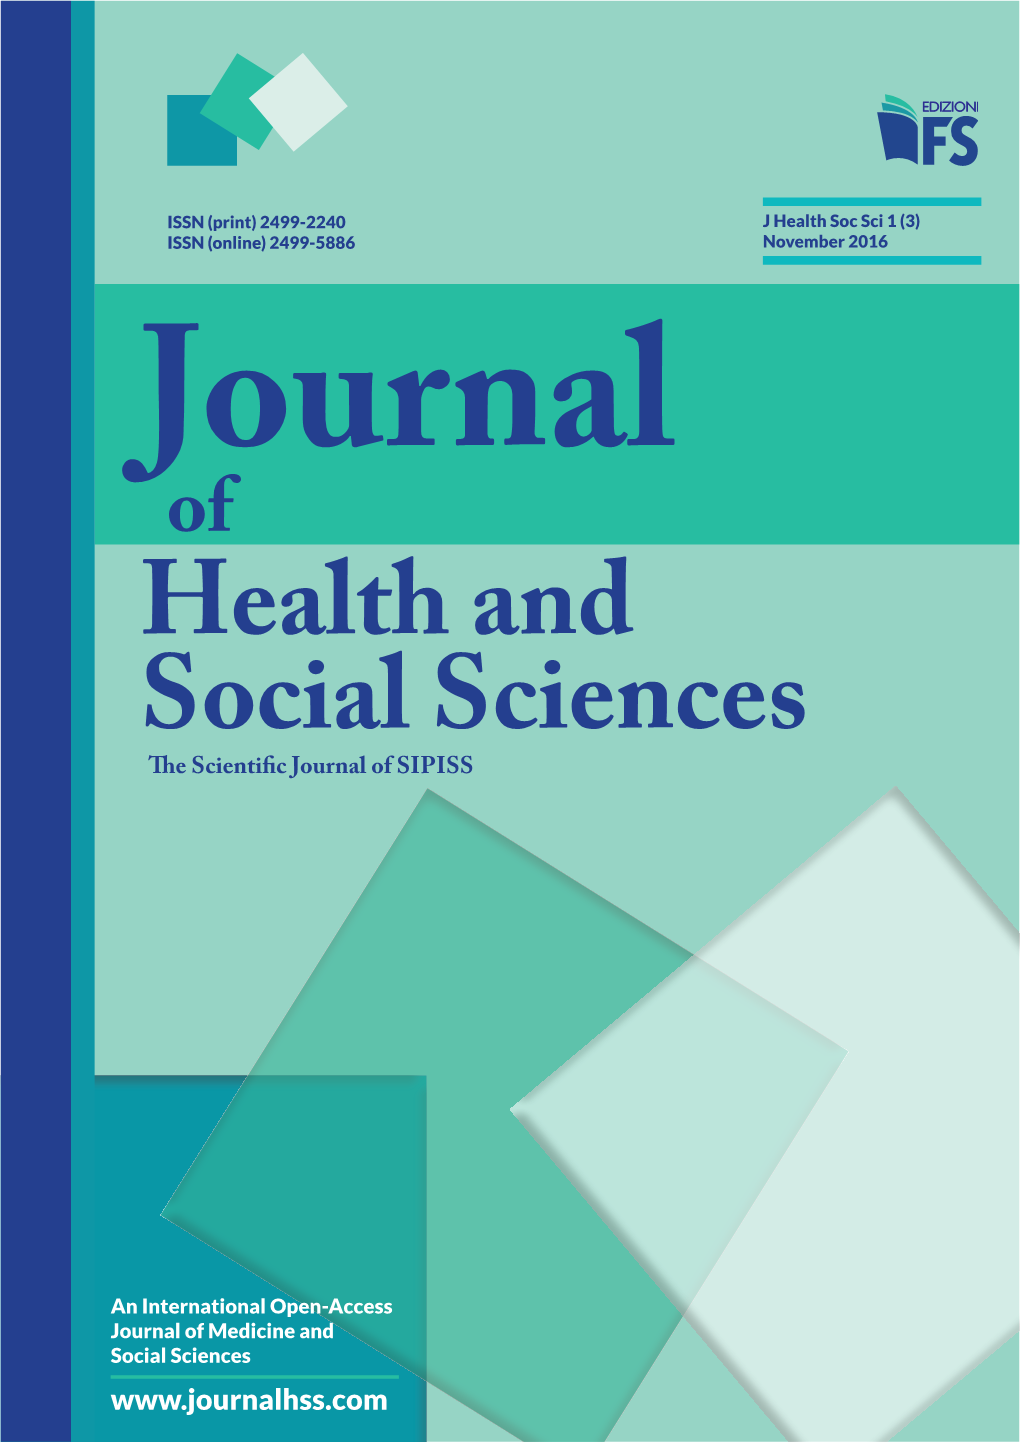 Journal of Health and Social Sciences 1(3)